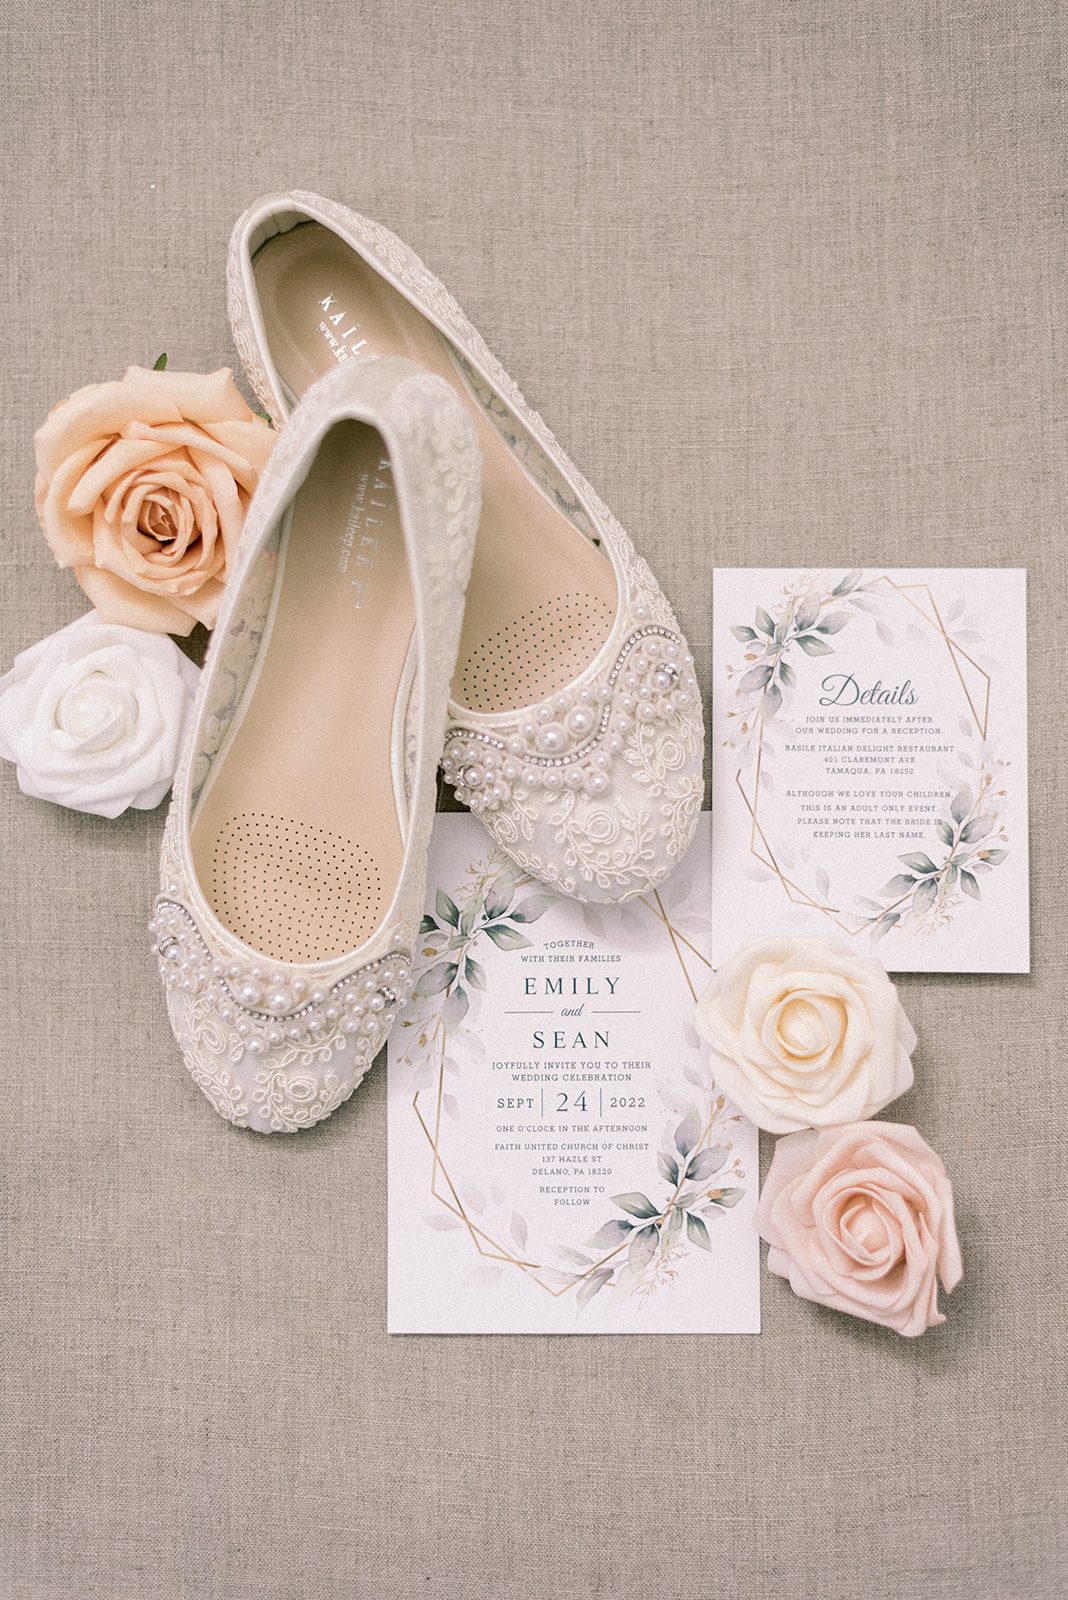 Pennsylvania wedding photographer captures bridal shoes with flowers and invitations next to them